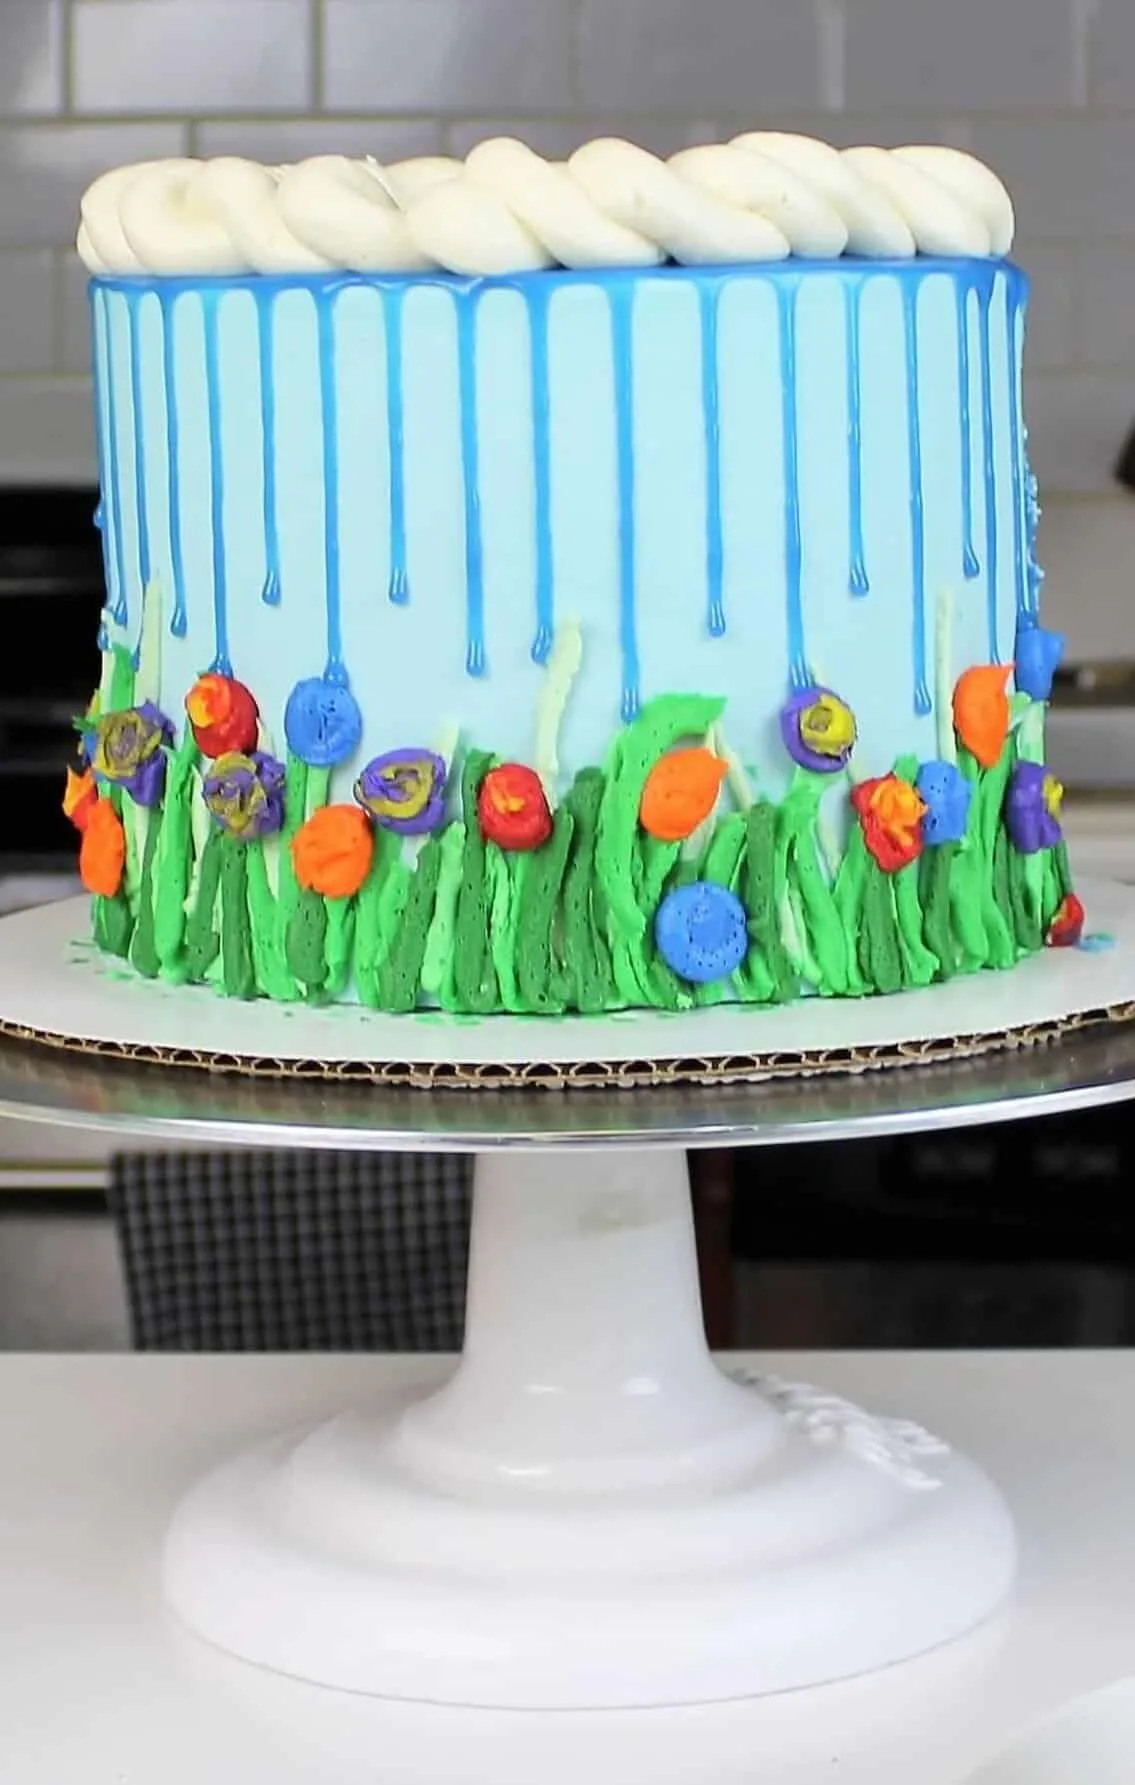 Spring themed cake, decorated with blue drips and colorful buttercream flowers